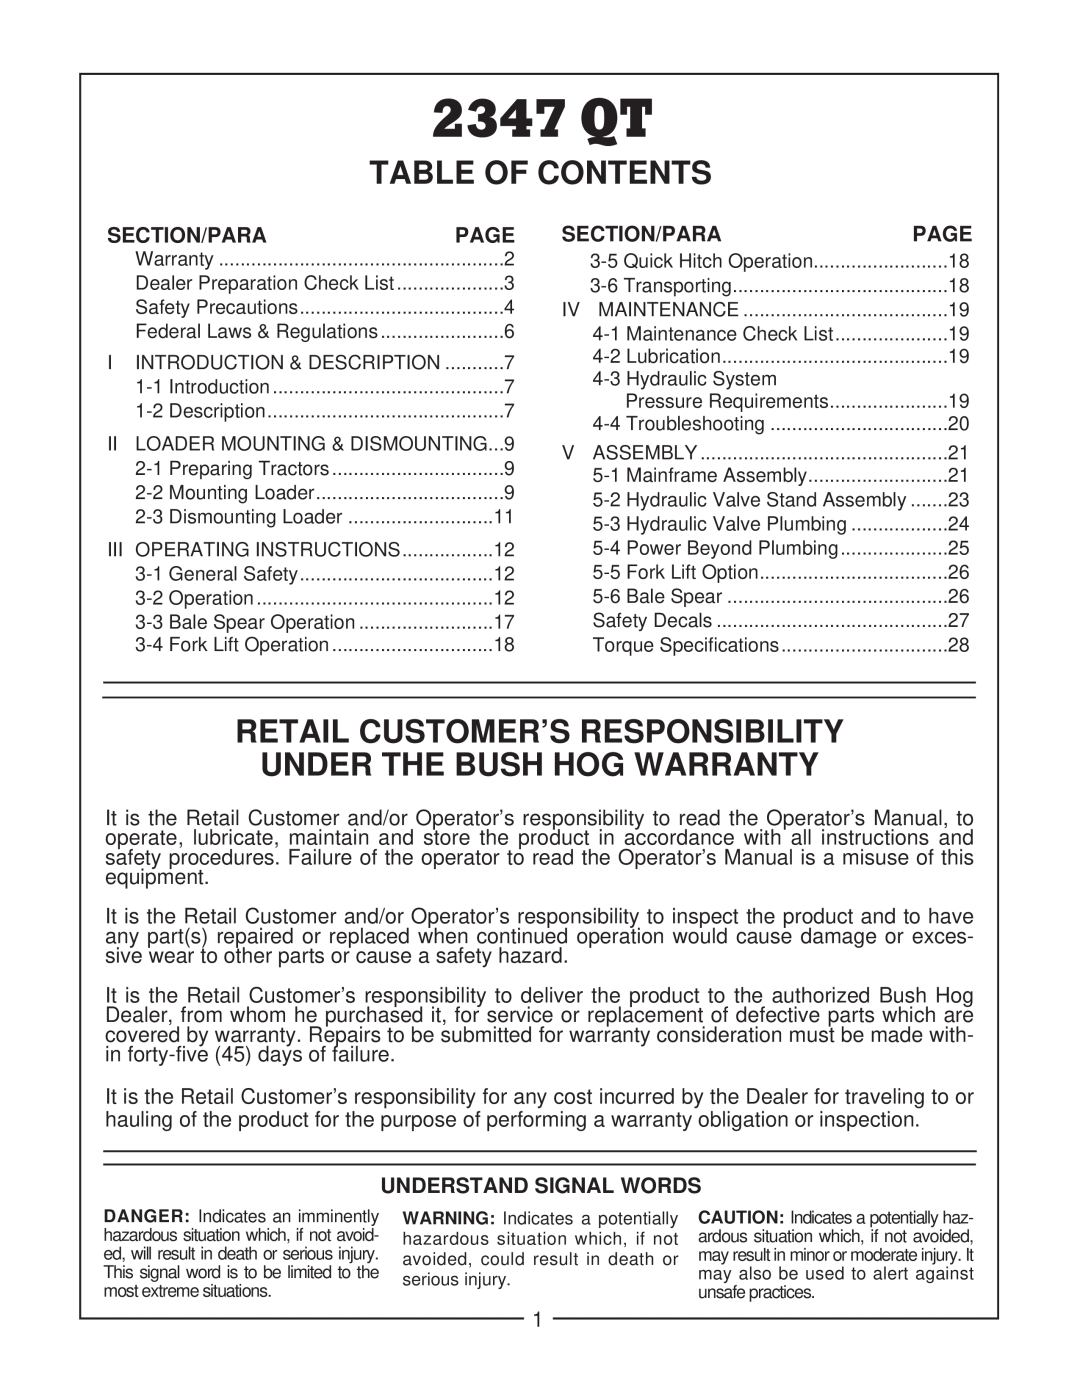 Bush Hog 2347 QT manual Table Of Contents, Retail Customer’S Responsibility Under The Bush Hog Warranty, Section/Para, Page 